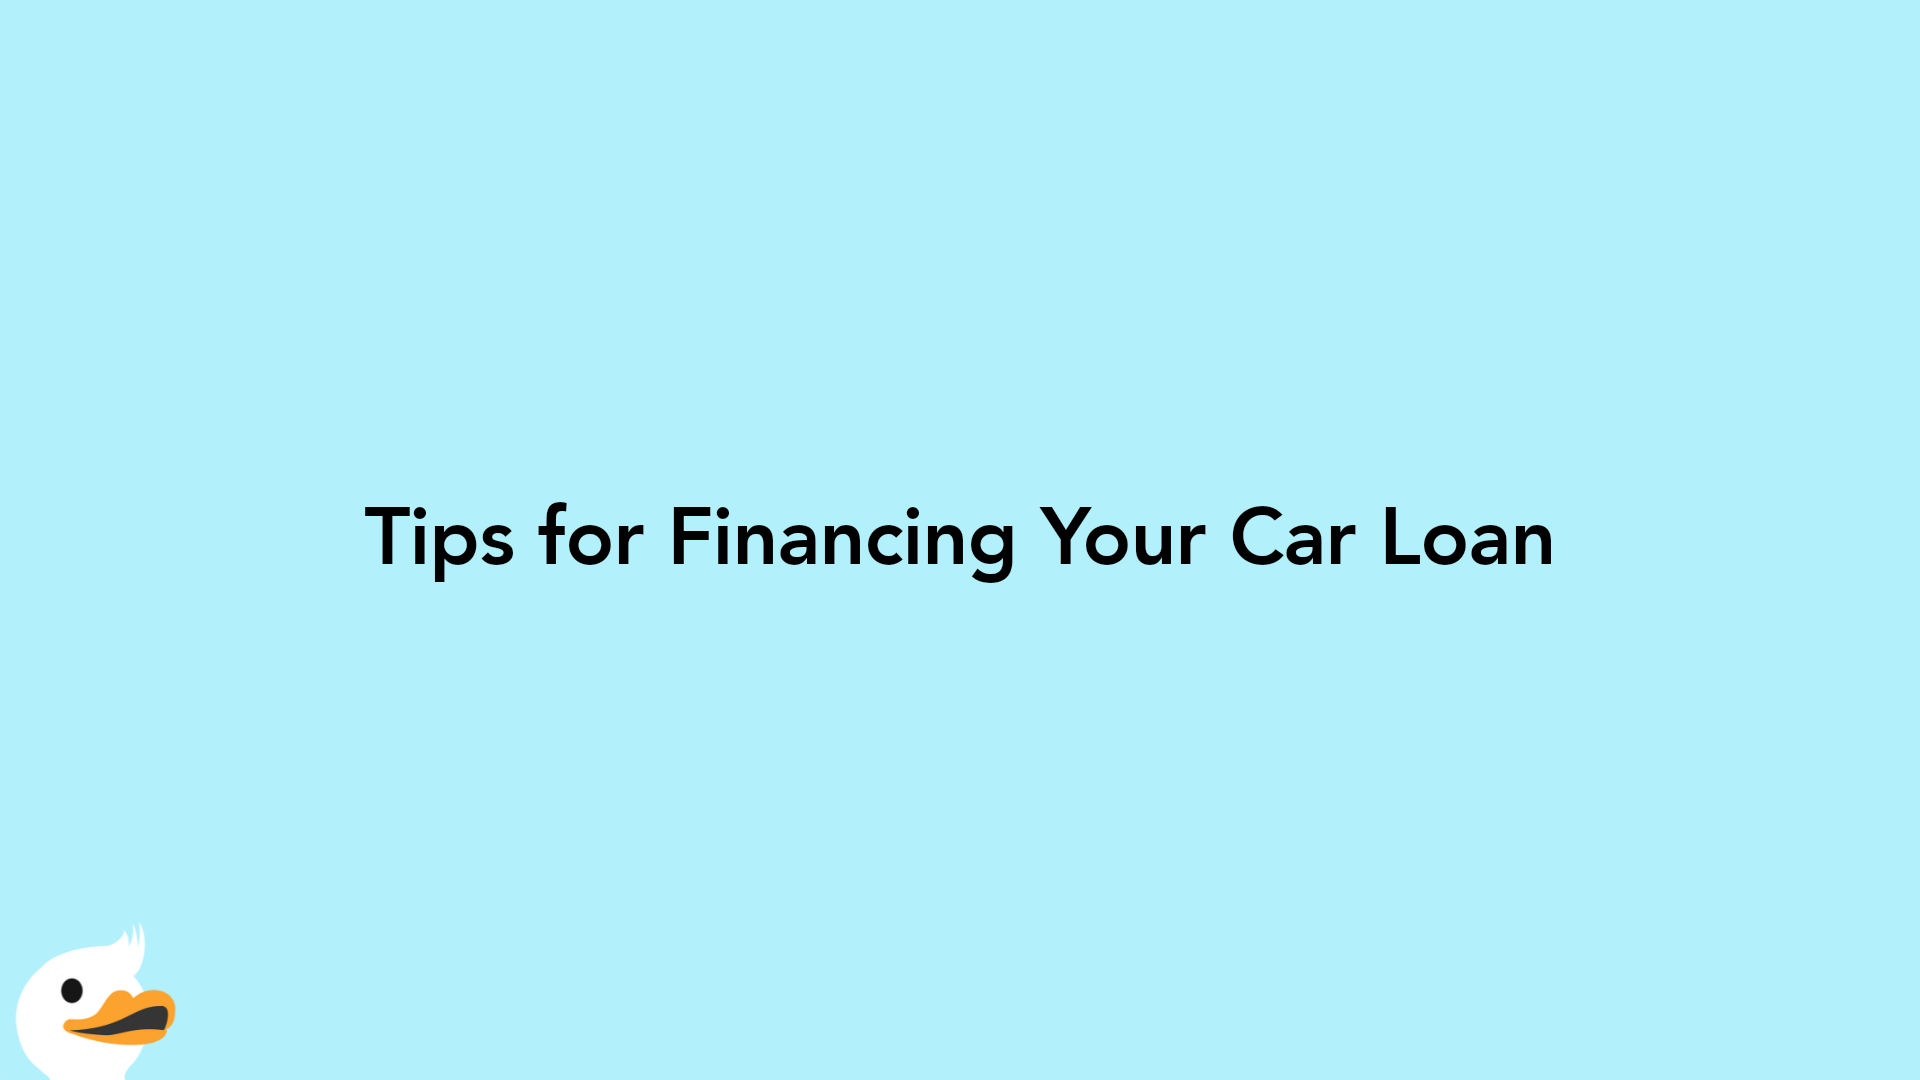 Tips for Financing Your Car Loan